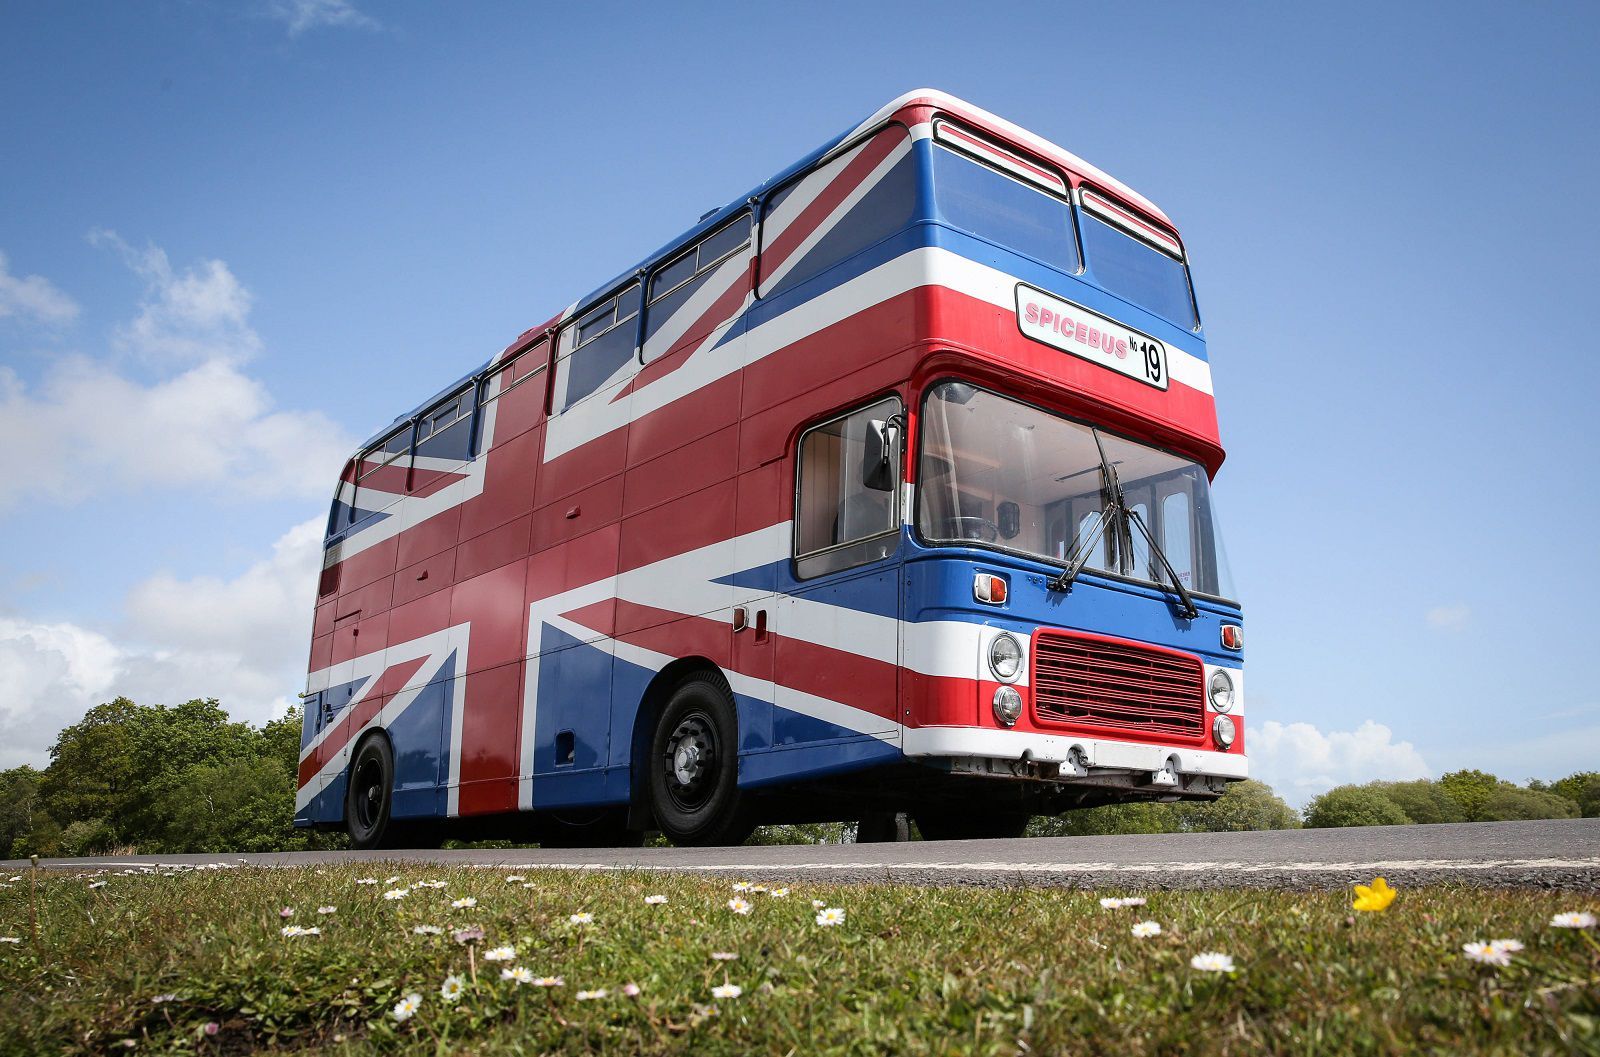 The Spice Girls bus is for rent on Airbnb Spice up your weekend!